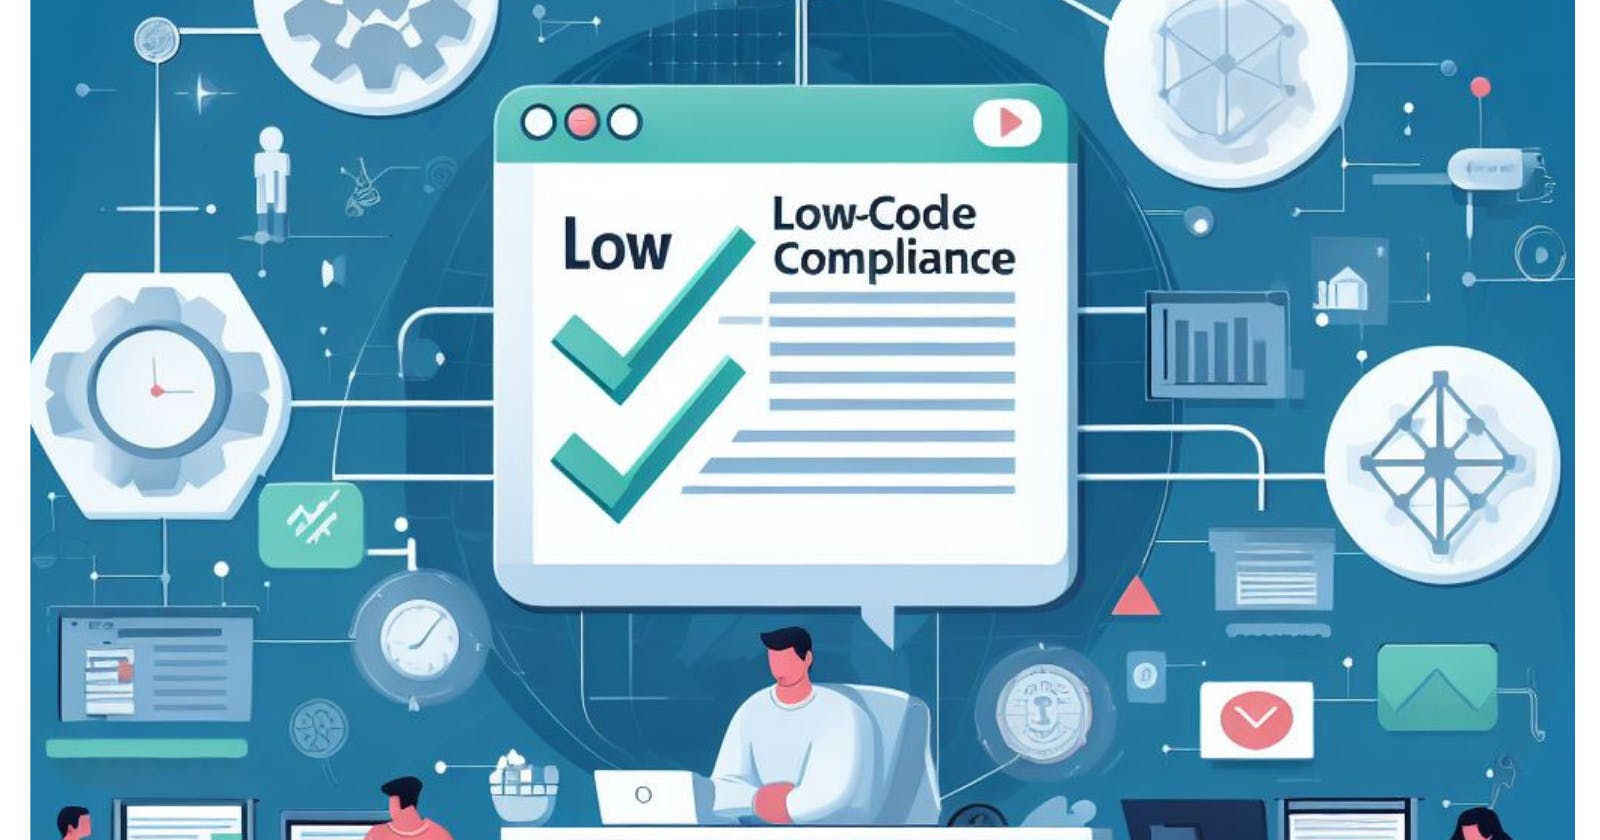 Low-code Compliance Management Tools